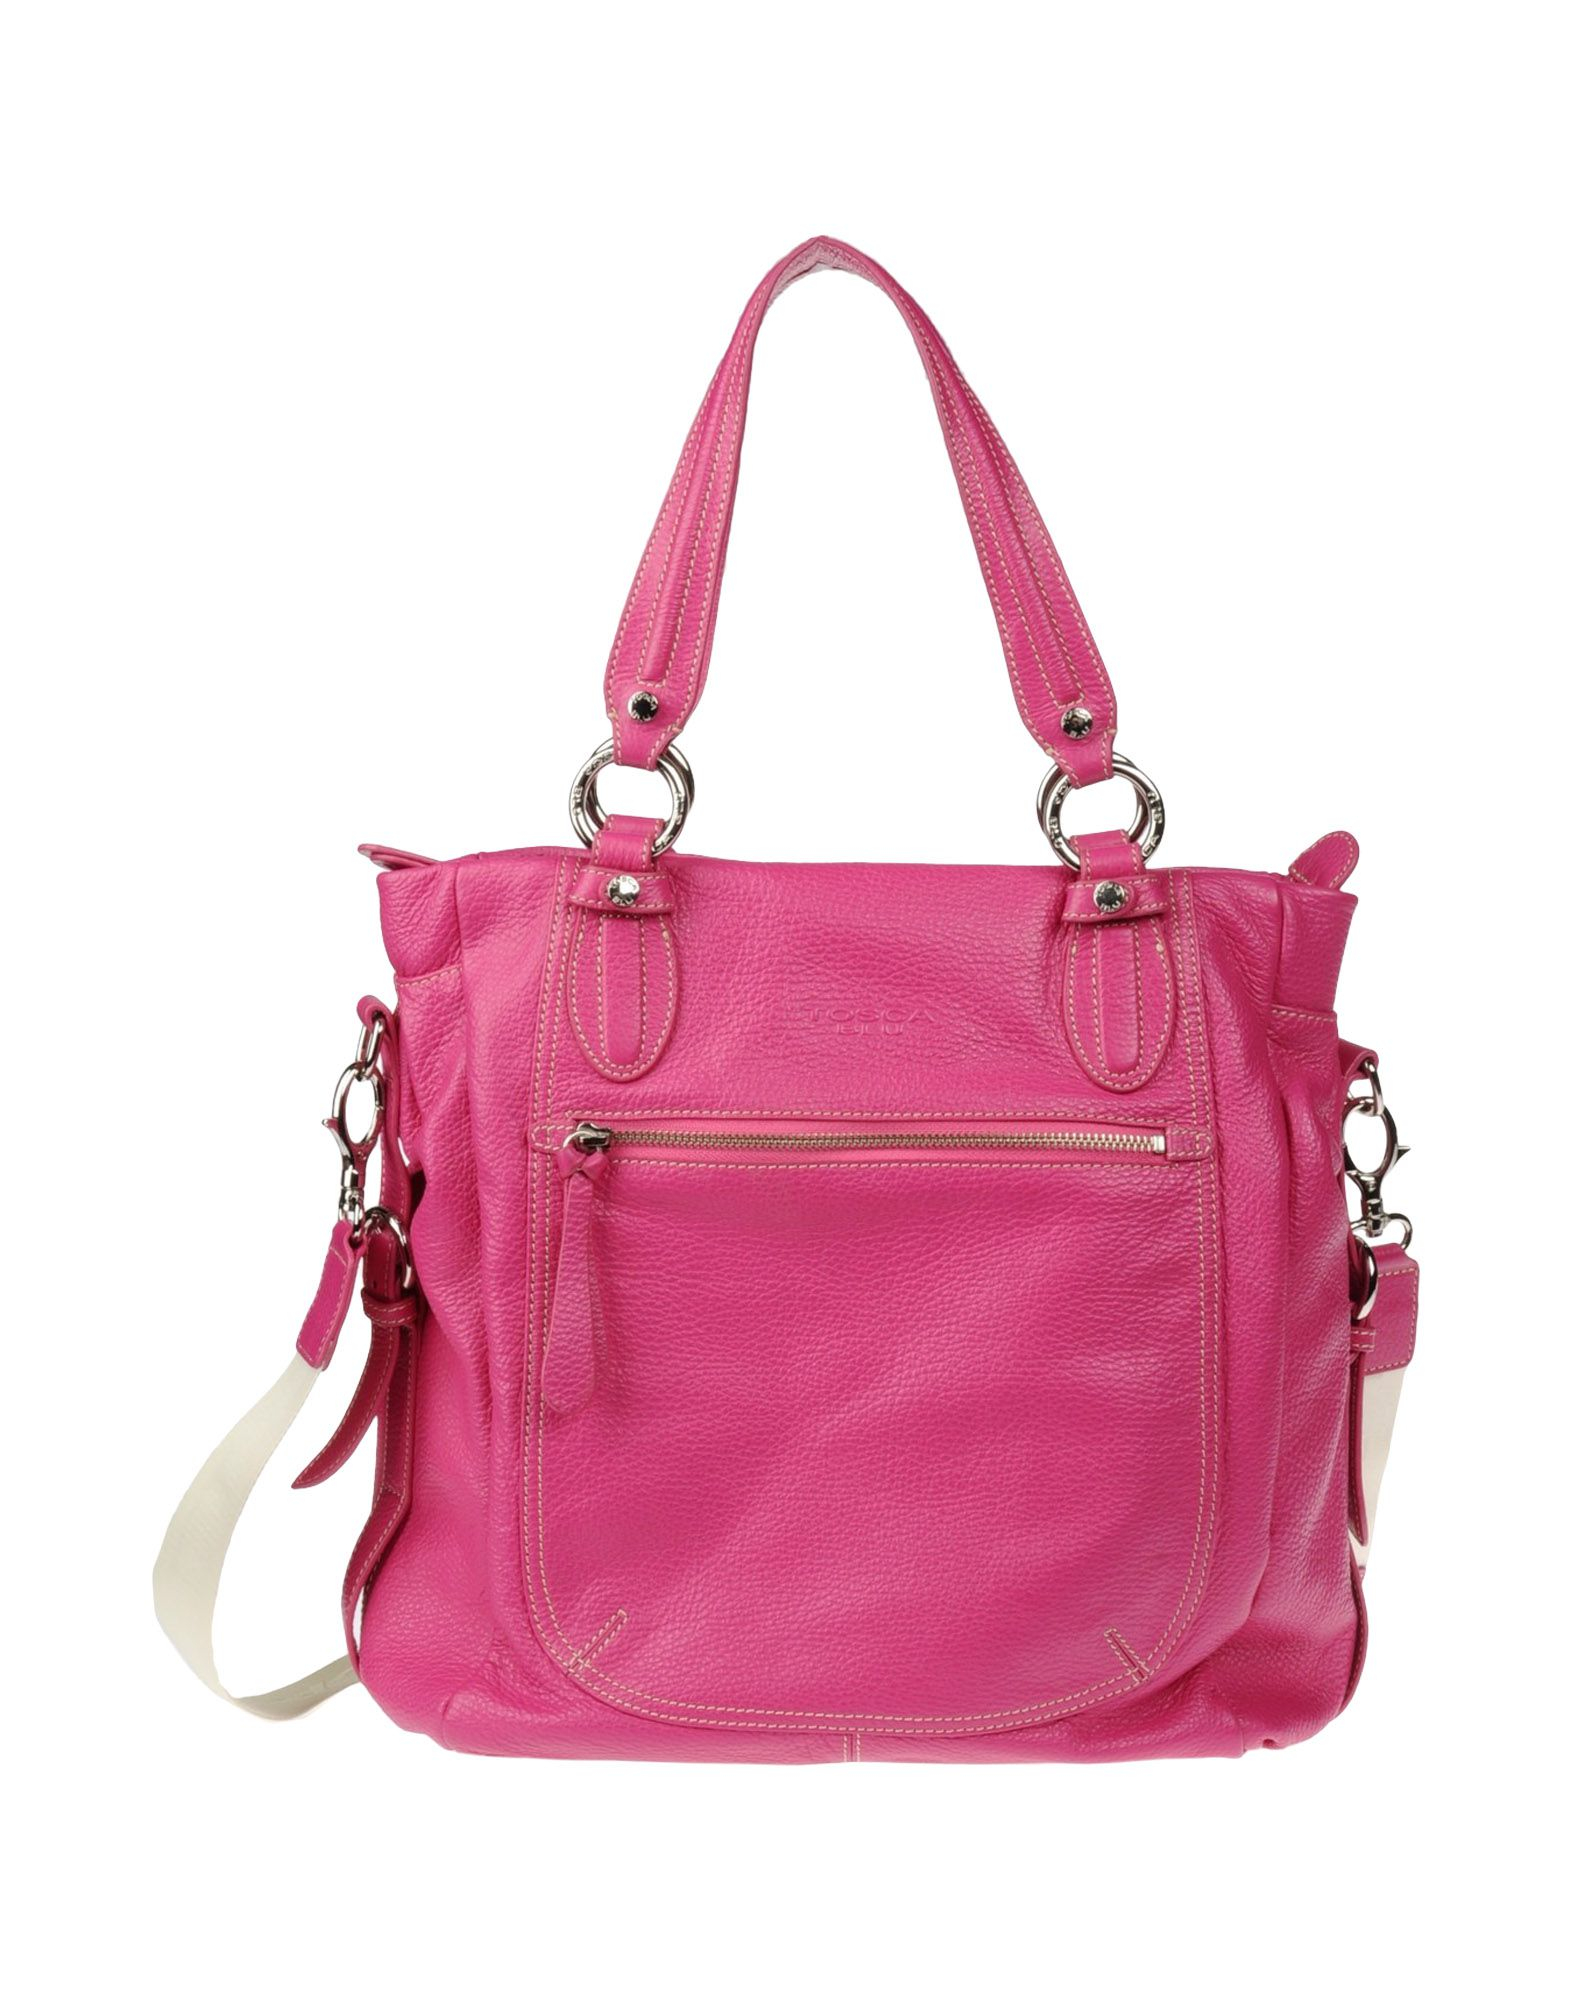 Tosca Blu Large Leather Bag in Pink (Fuchsia) | Lyst